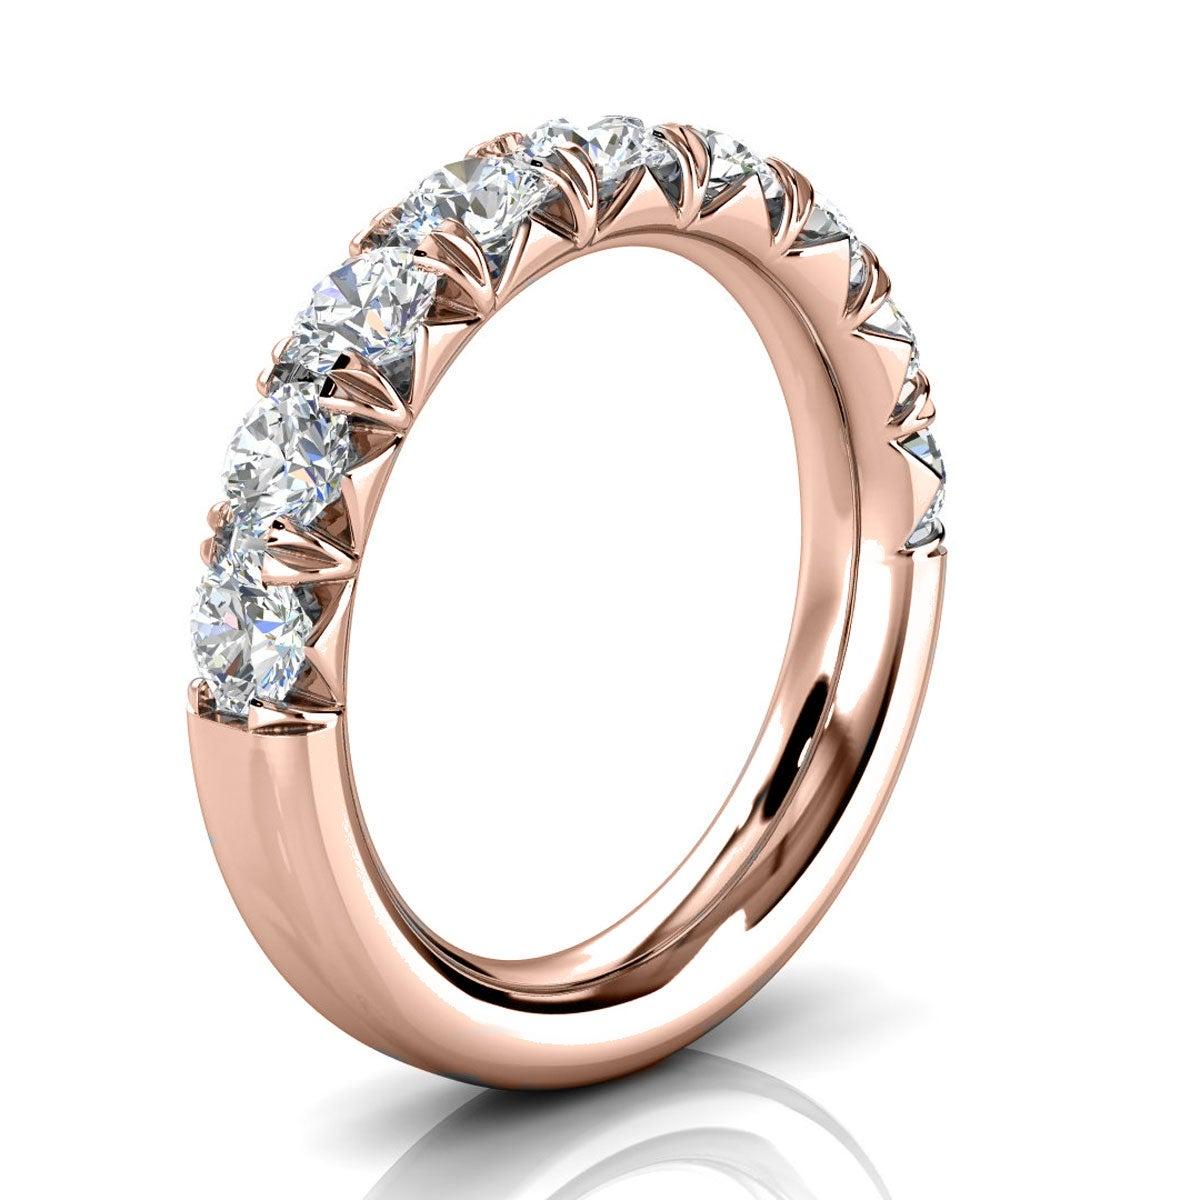 For Sale:  14k Rose Gold Voyage French Pave Diamond Ring '1 1/2 Ct. tw' 2